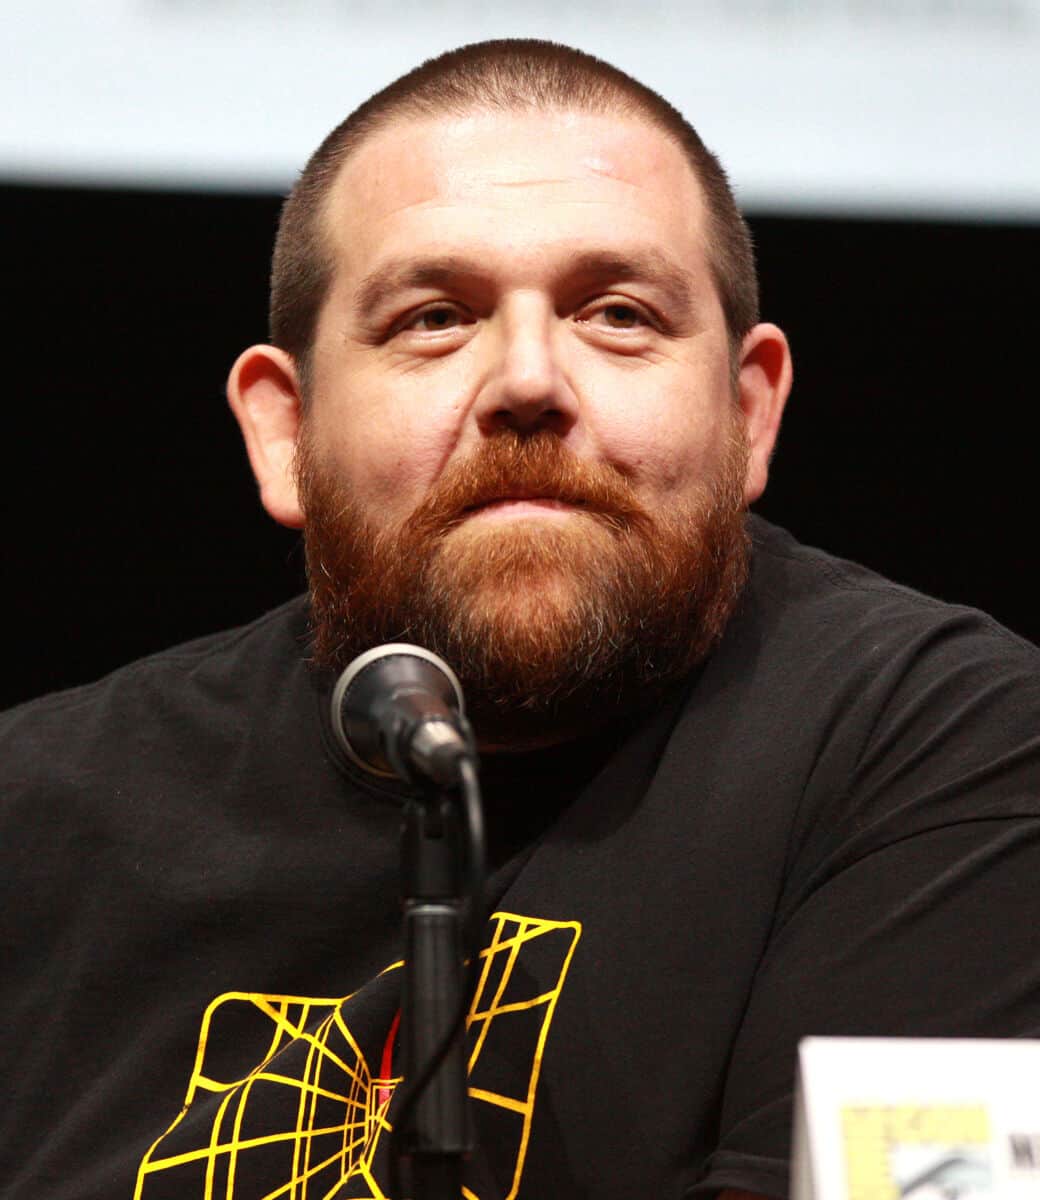 Nick Frost - Famous Writer